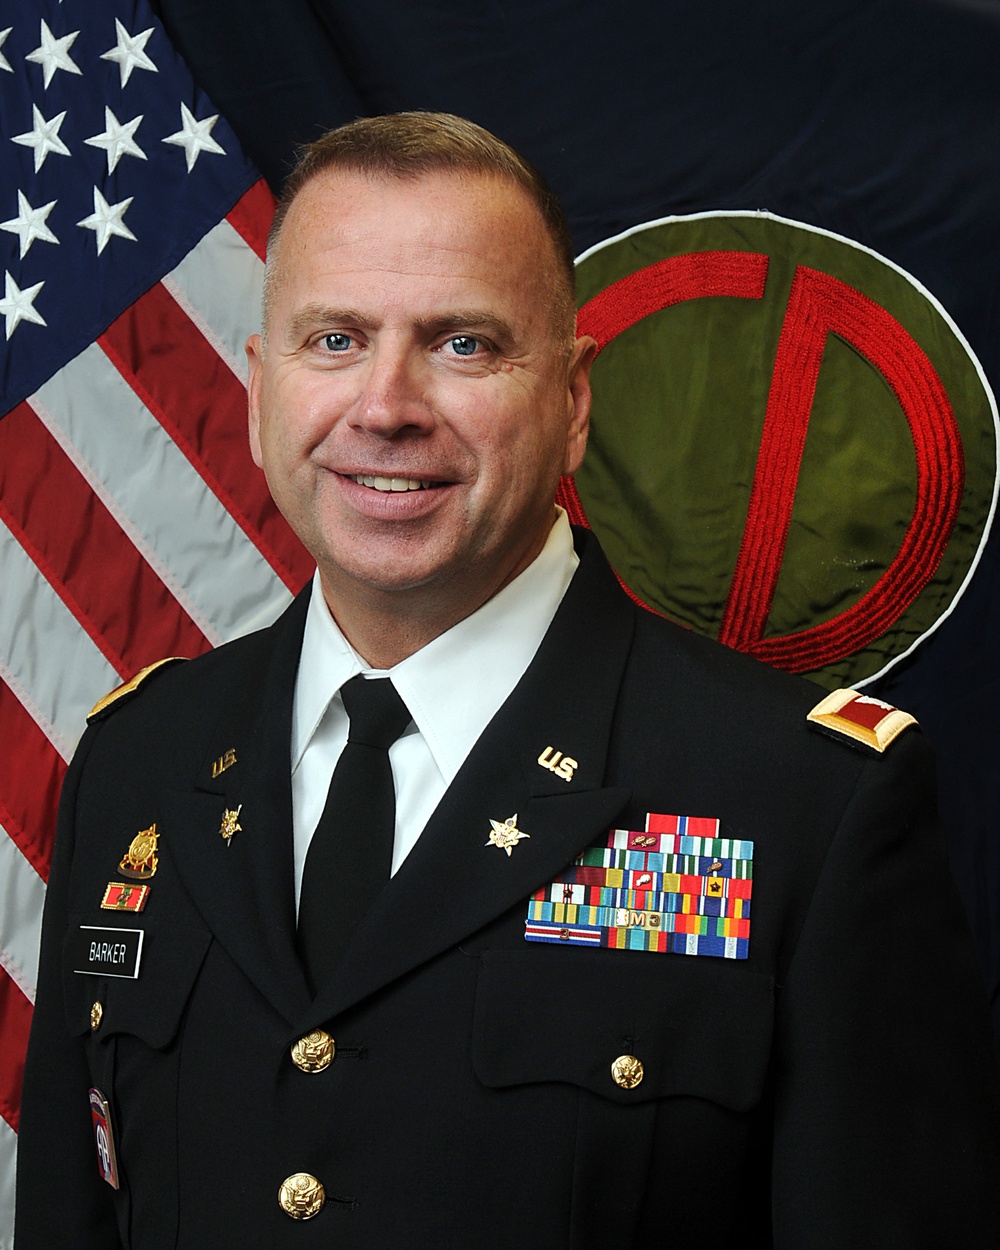 Army Reserve officer selected for promotion to brigadier general